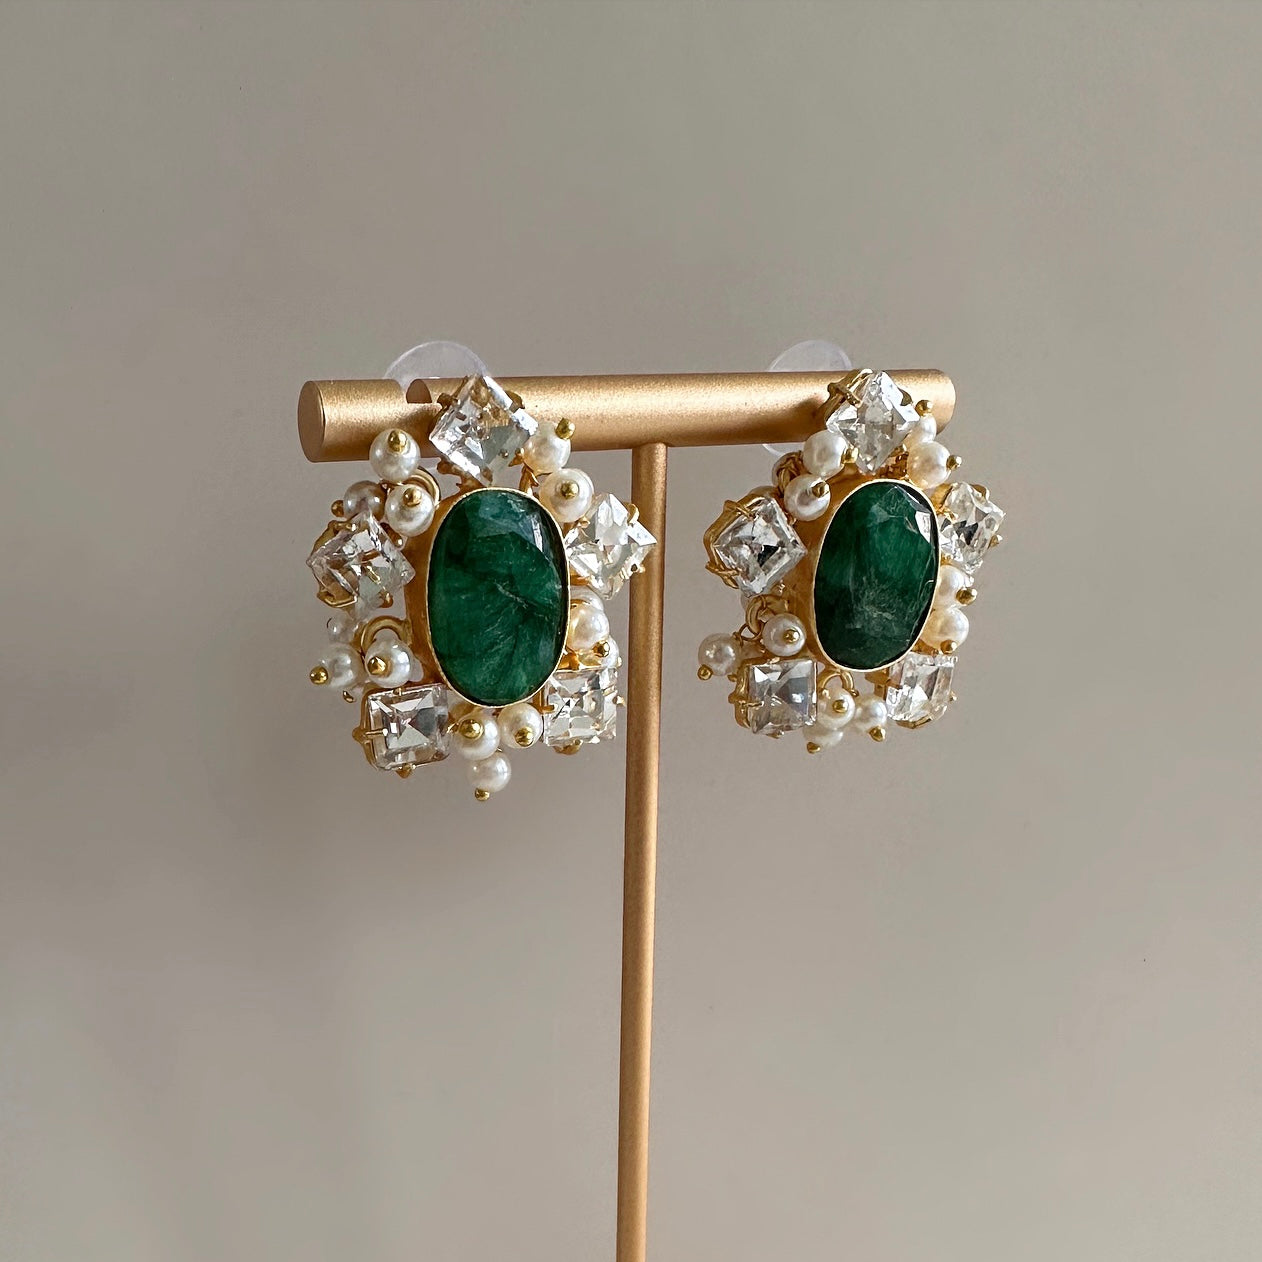 Bring timeless sophistication to any ensemble with these stunning Cleo Earrings. Each piece is elegantly designed to add just the right touch of opulence to any look. Perfect for special occasions or to dress up an everyday look. Available in green & red corundum. Earring drop 3.5cm